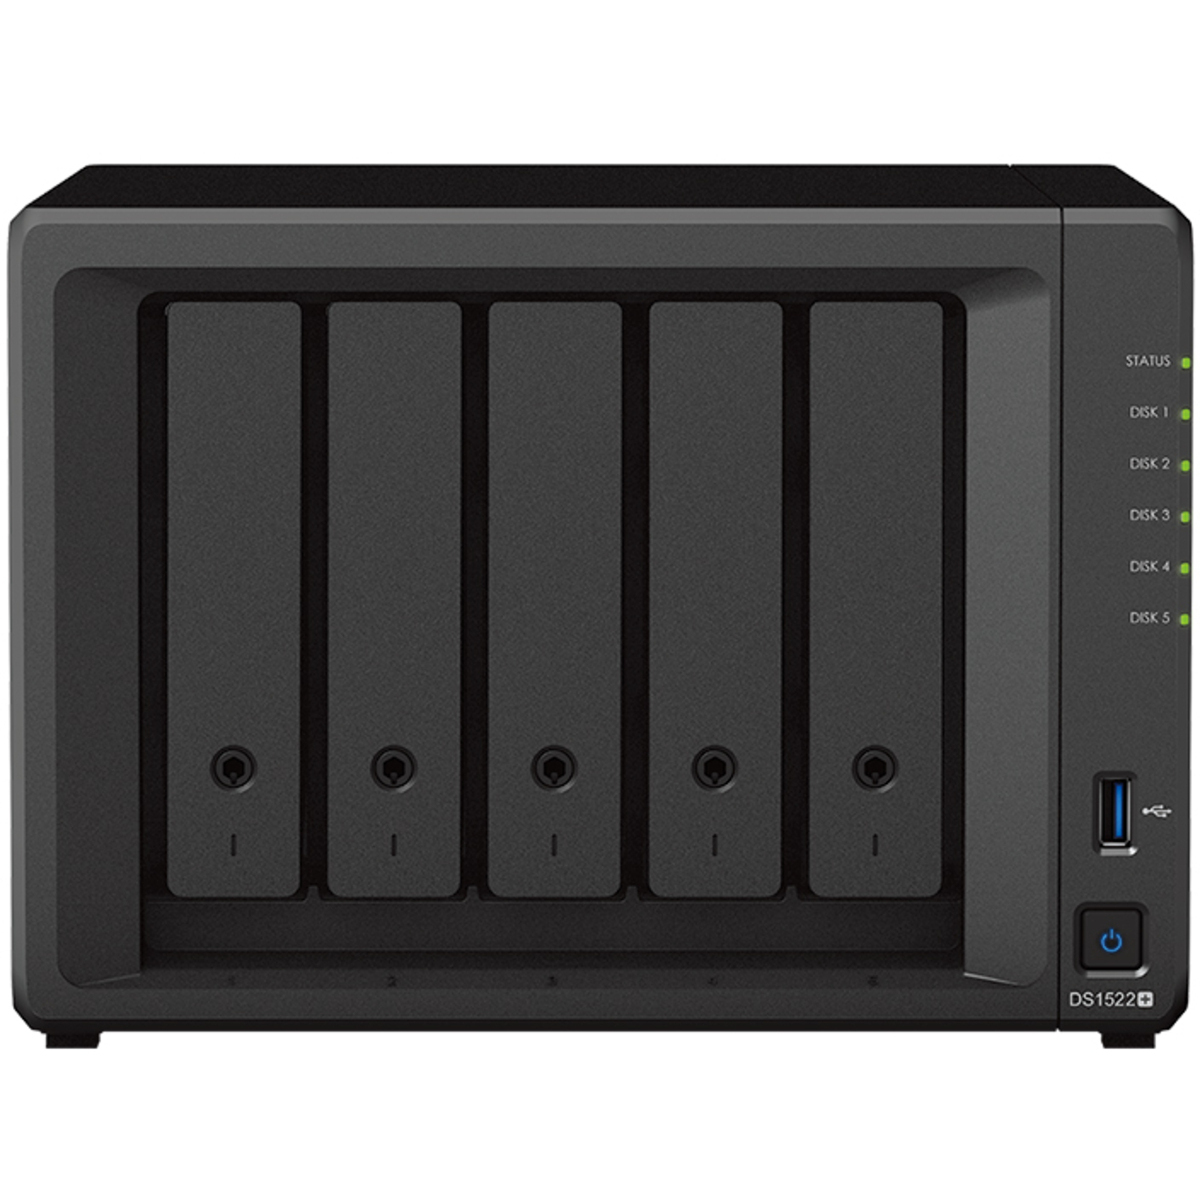 Synology DiskStation DS1522+ 110tb 5-Bay Desktop Multimedia / Power User / Business NAS - Network Attached Storage Device 5x22tb Western Digital Ultrastar HC570 WUH722222ALE6L4 3.5 7200rpm SATA 6Gb/s HDD ENTERPRISE Class Drives Installed - Burn-In Tested - ON SALE DiskStation DS1522+